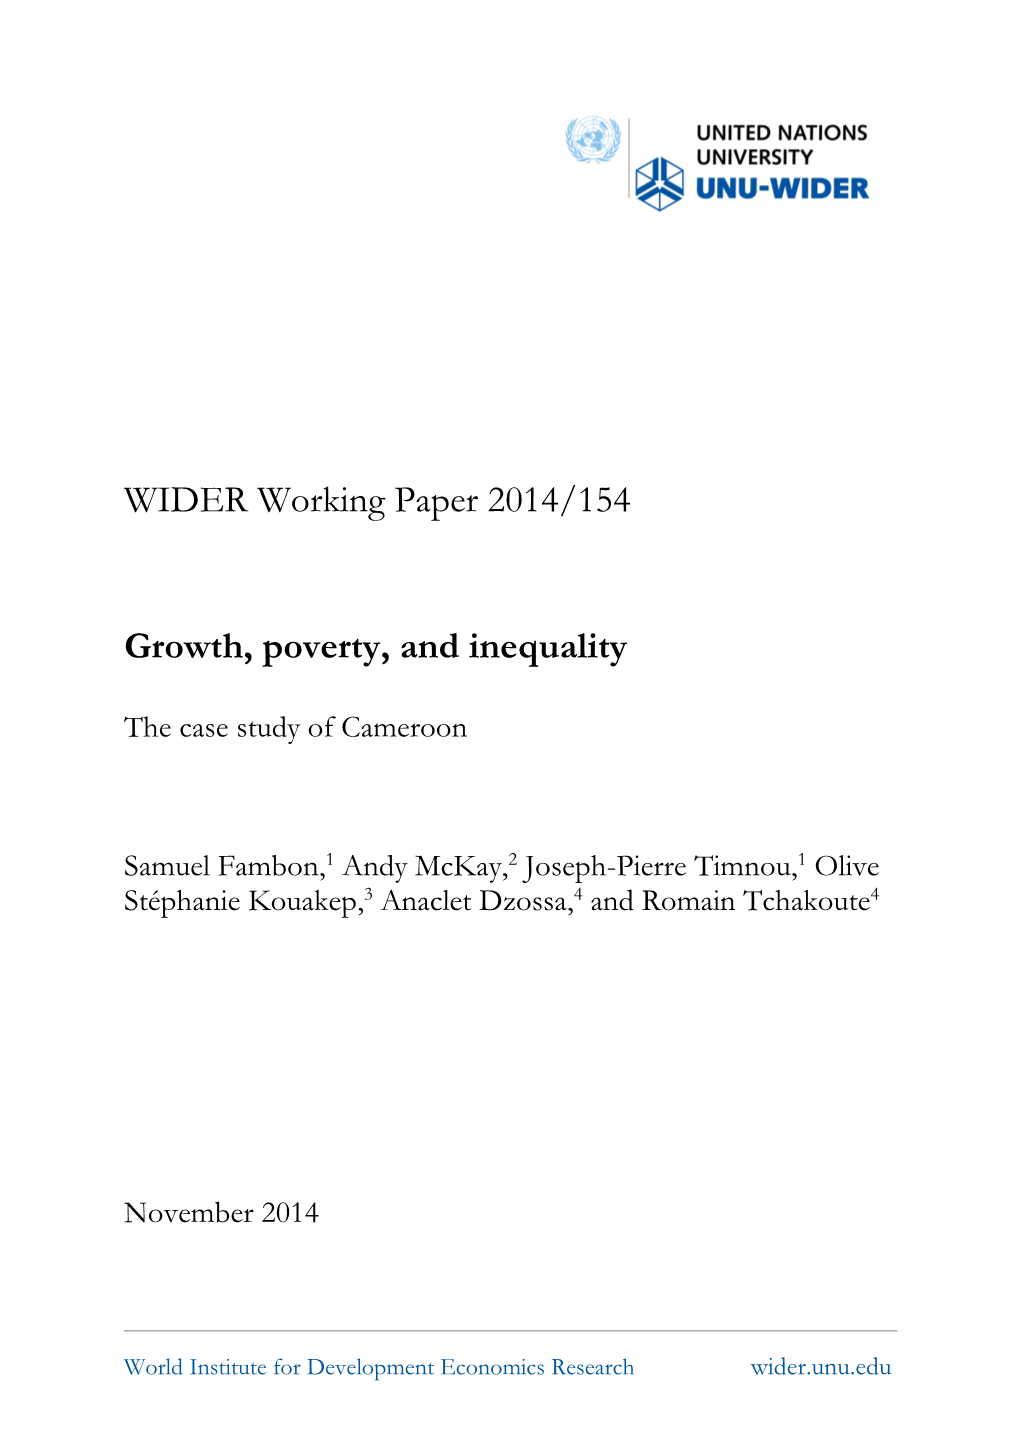 WIDER Working Paper 2014/154 Growth, Poverty, and Inequality